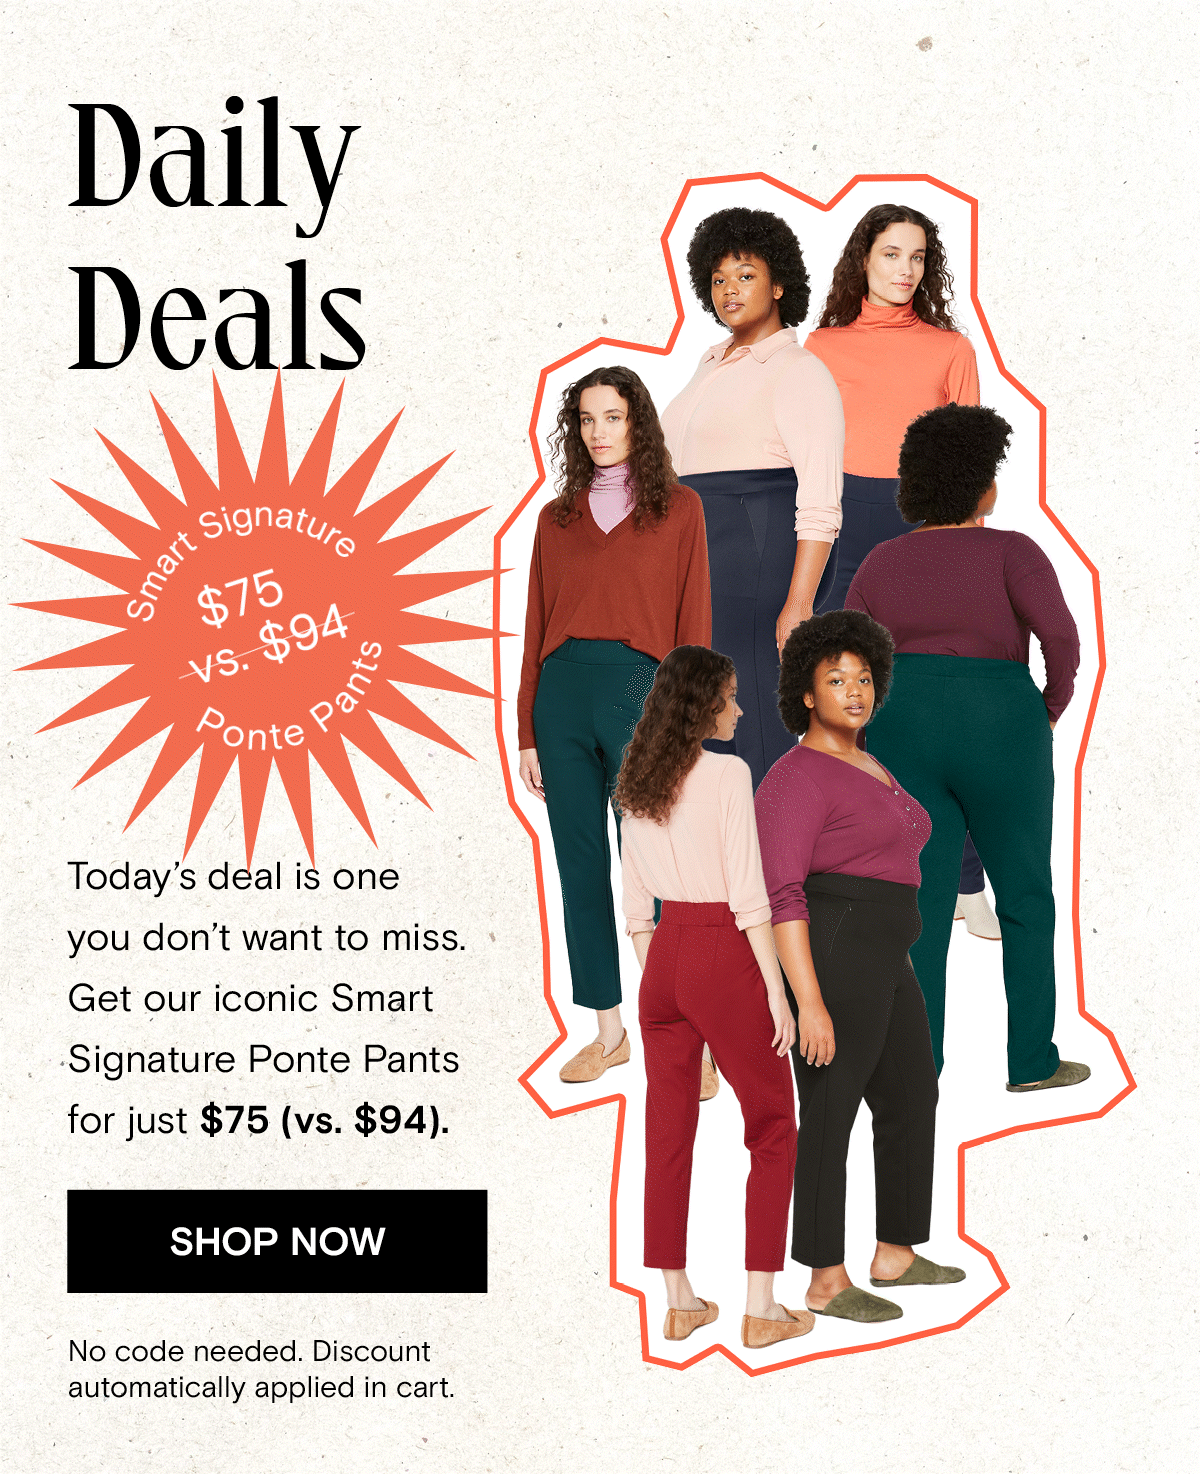 Today's Daily deal is $75 for our ponte pants